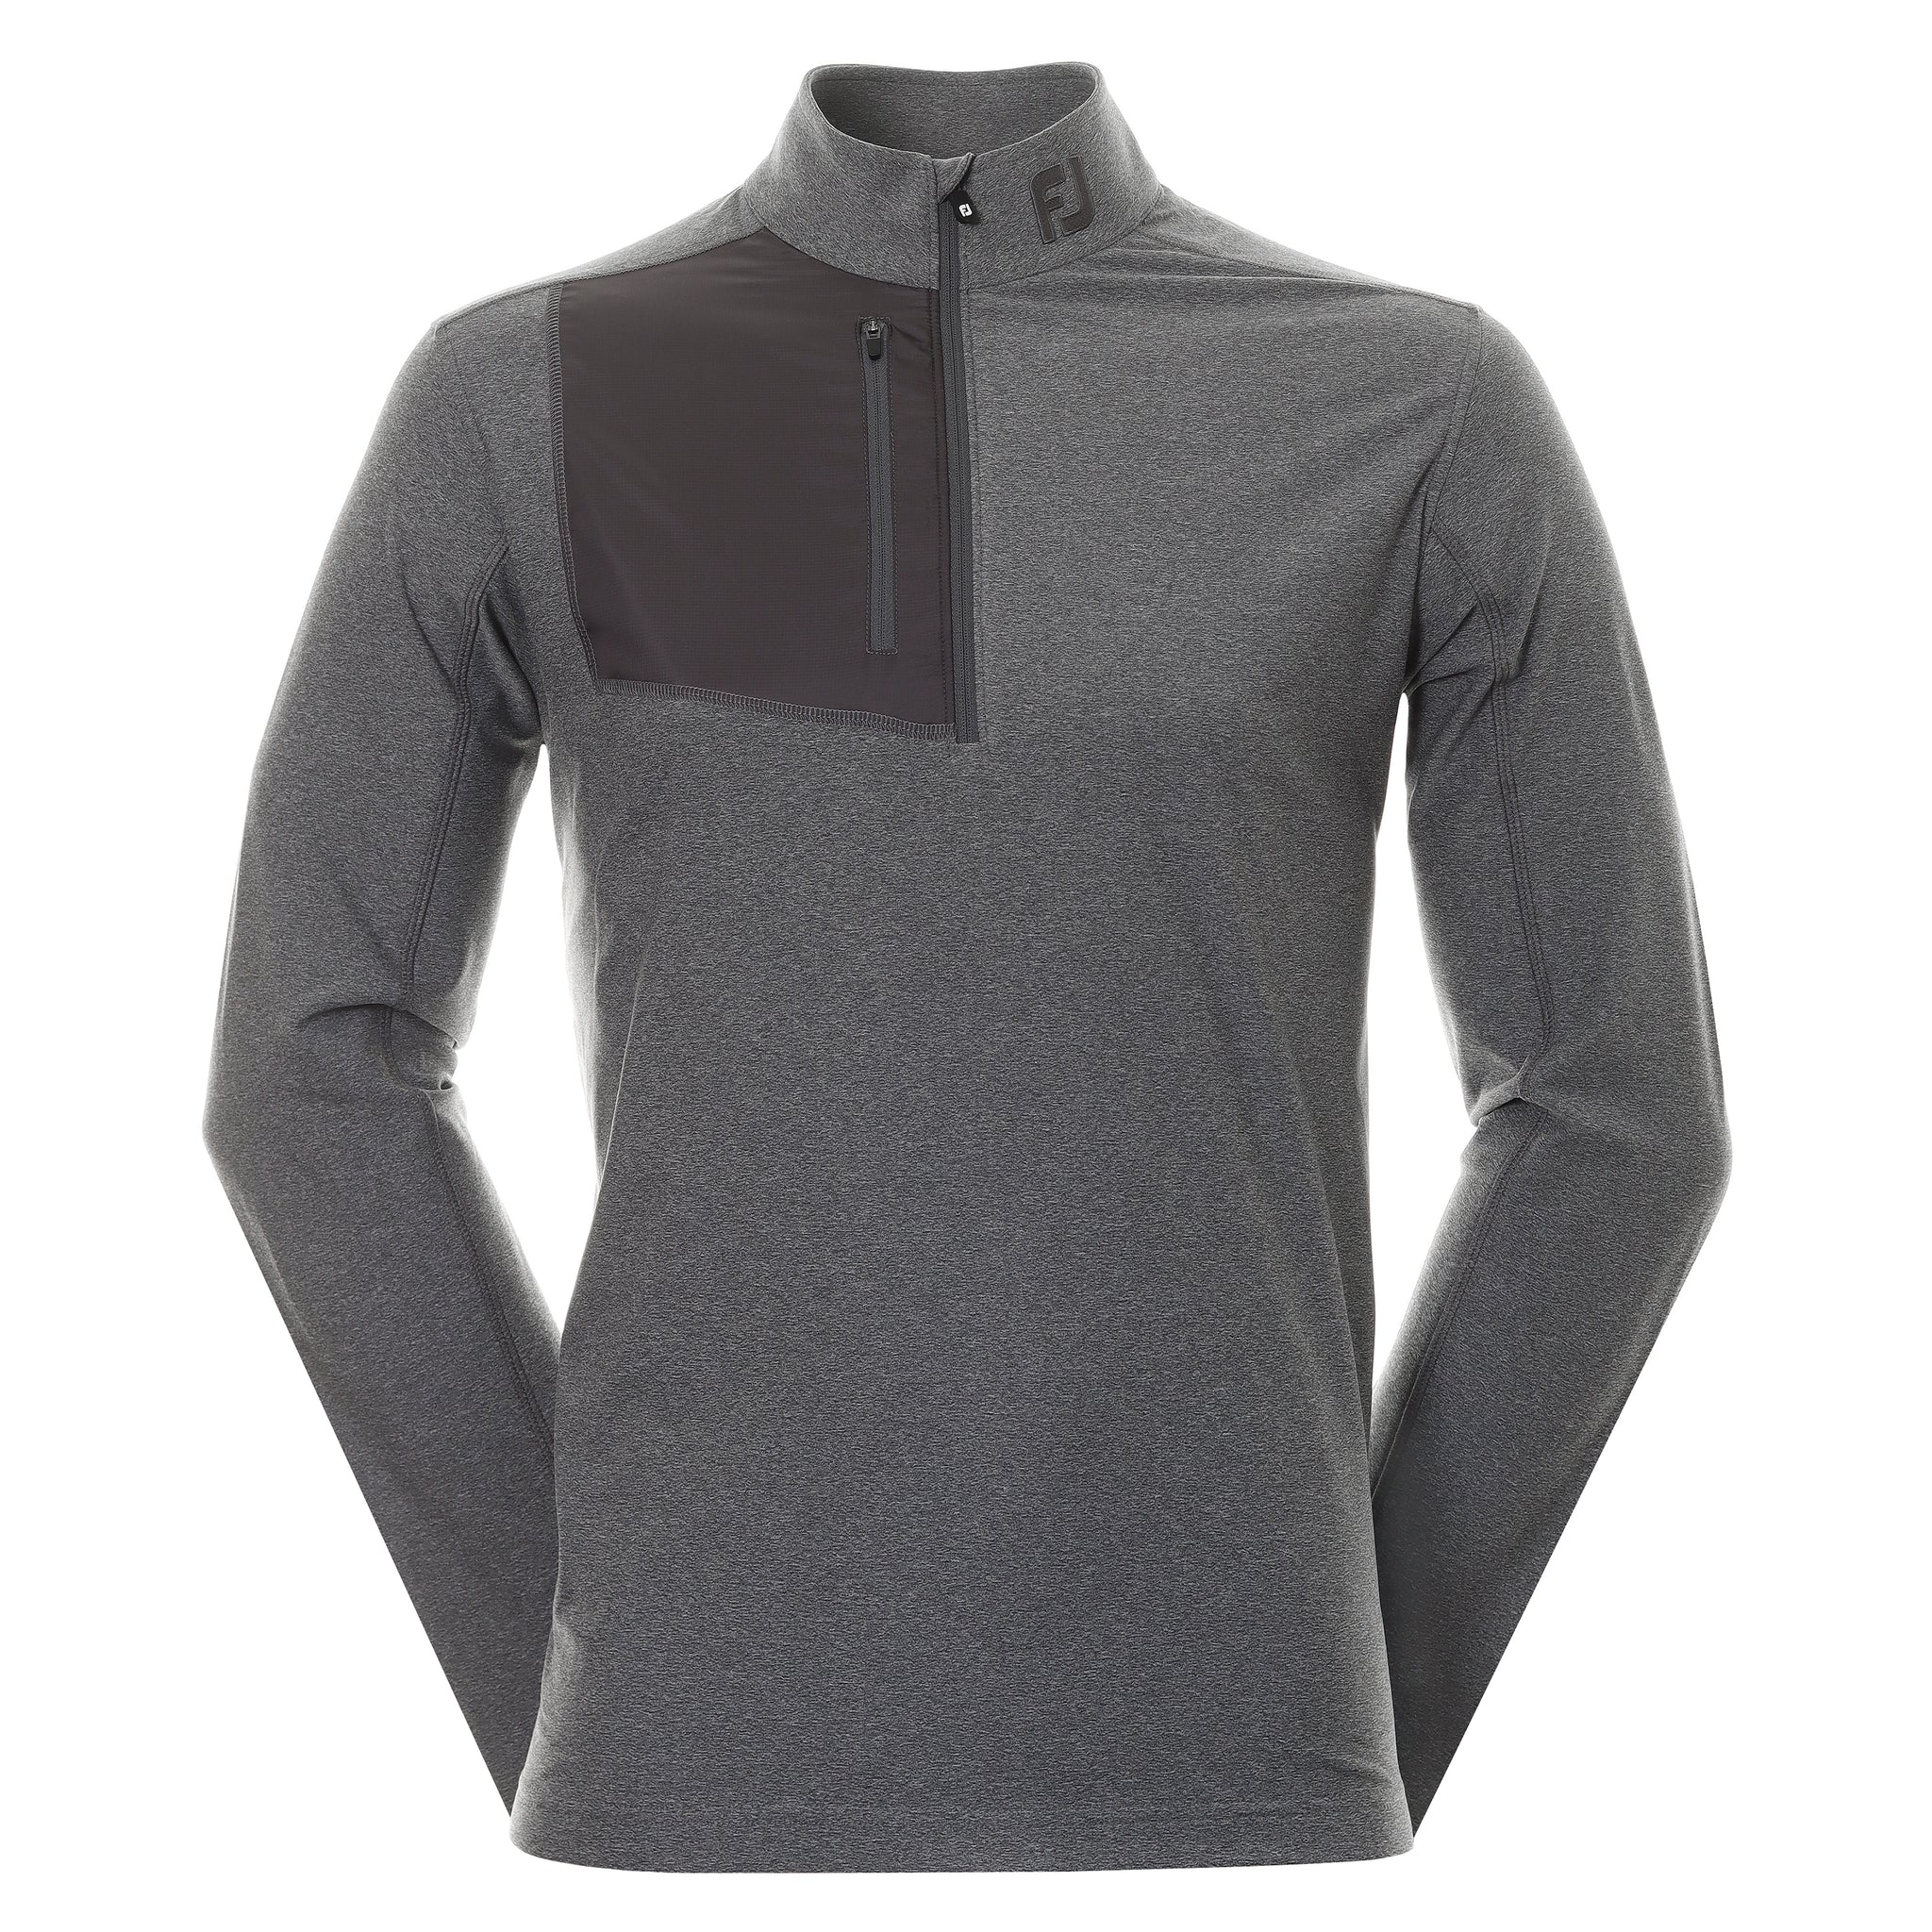 footjoy-heather-xp-chill-out-pullover-88833-heather-charcoal